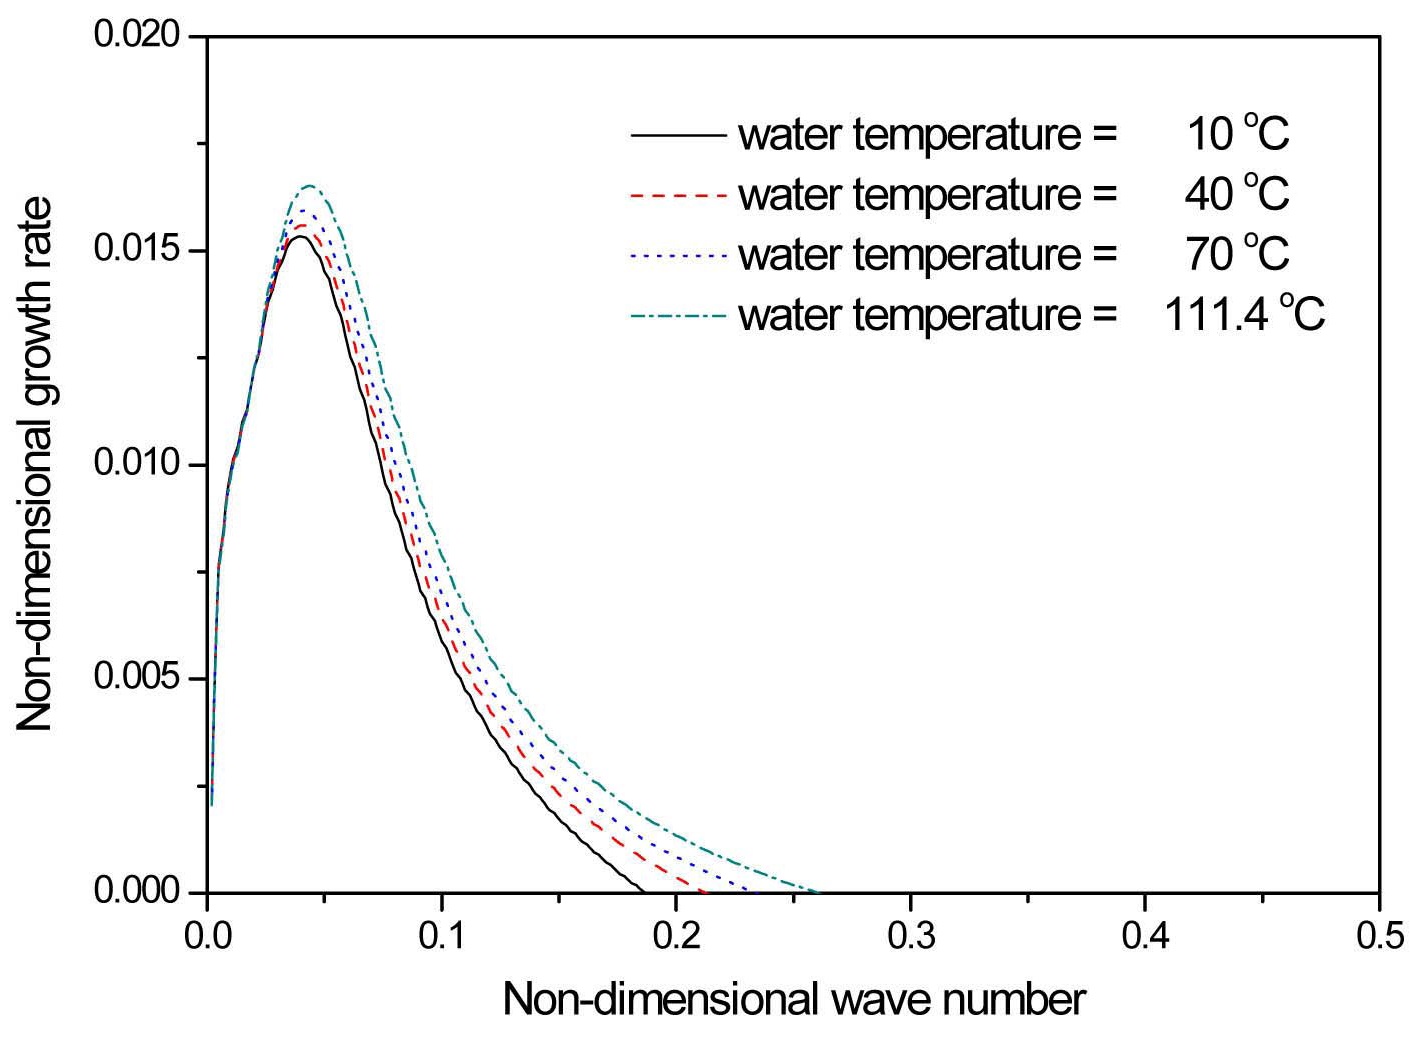 Non-dimensionless Temporal Growth rate as a
Function of Non-dimensional Wavenumber for P=0.15 MPa,
？1=1m/sec, U2,M=10m/sec, H=0.05mm, δ=0.5mm, and
Different Water Temperature